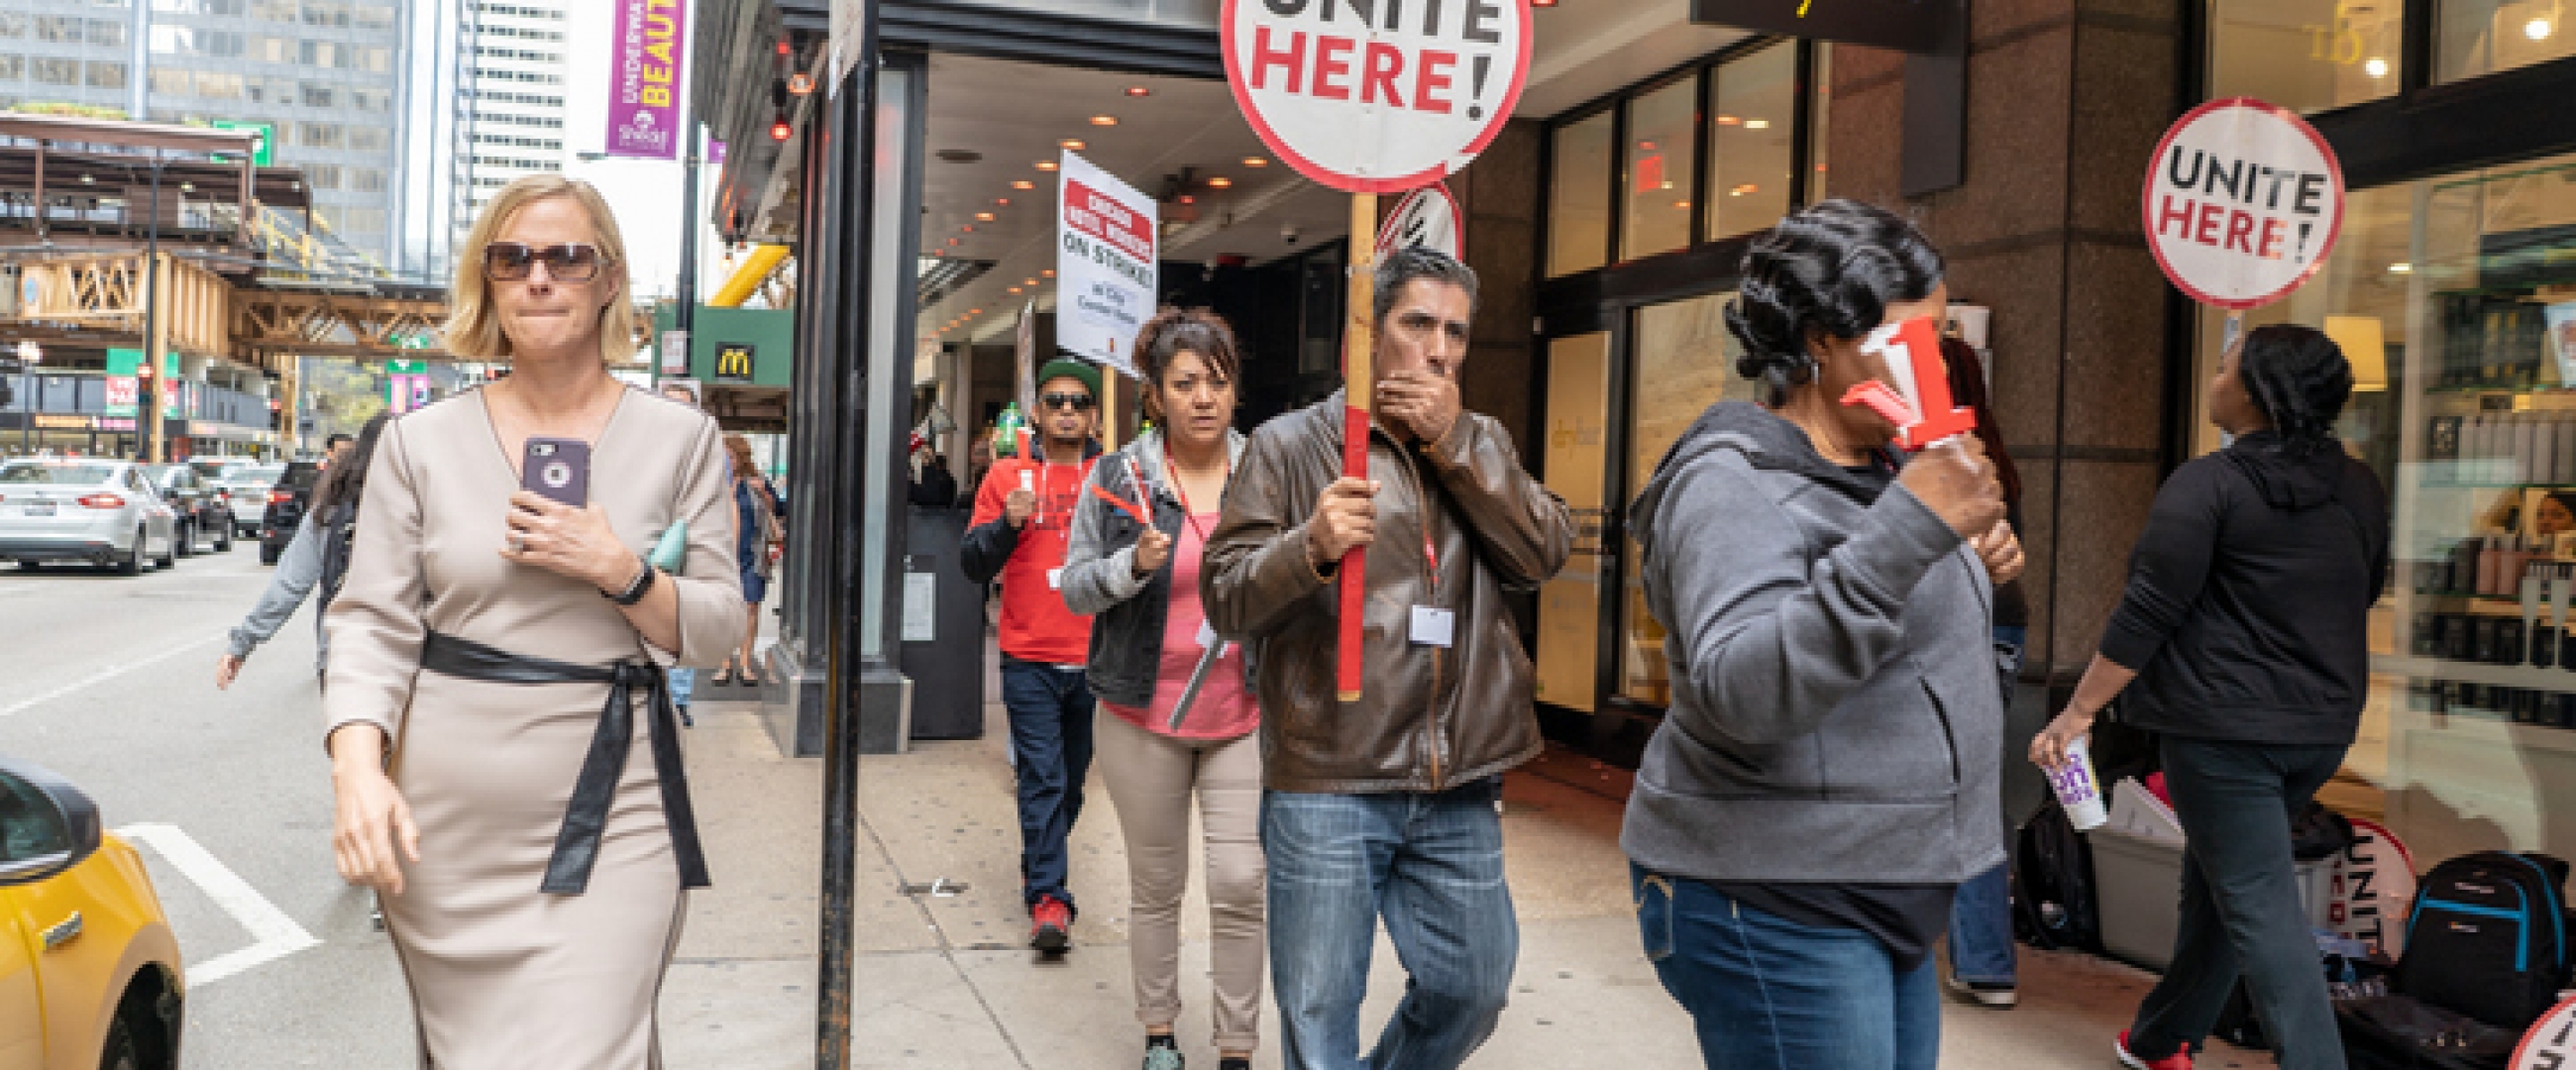 Chicago, IL / USA - September 10, 2018: People join a hotel workers' protest around Labor Day, carrying "Workers Unite" signs.